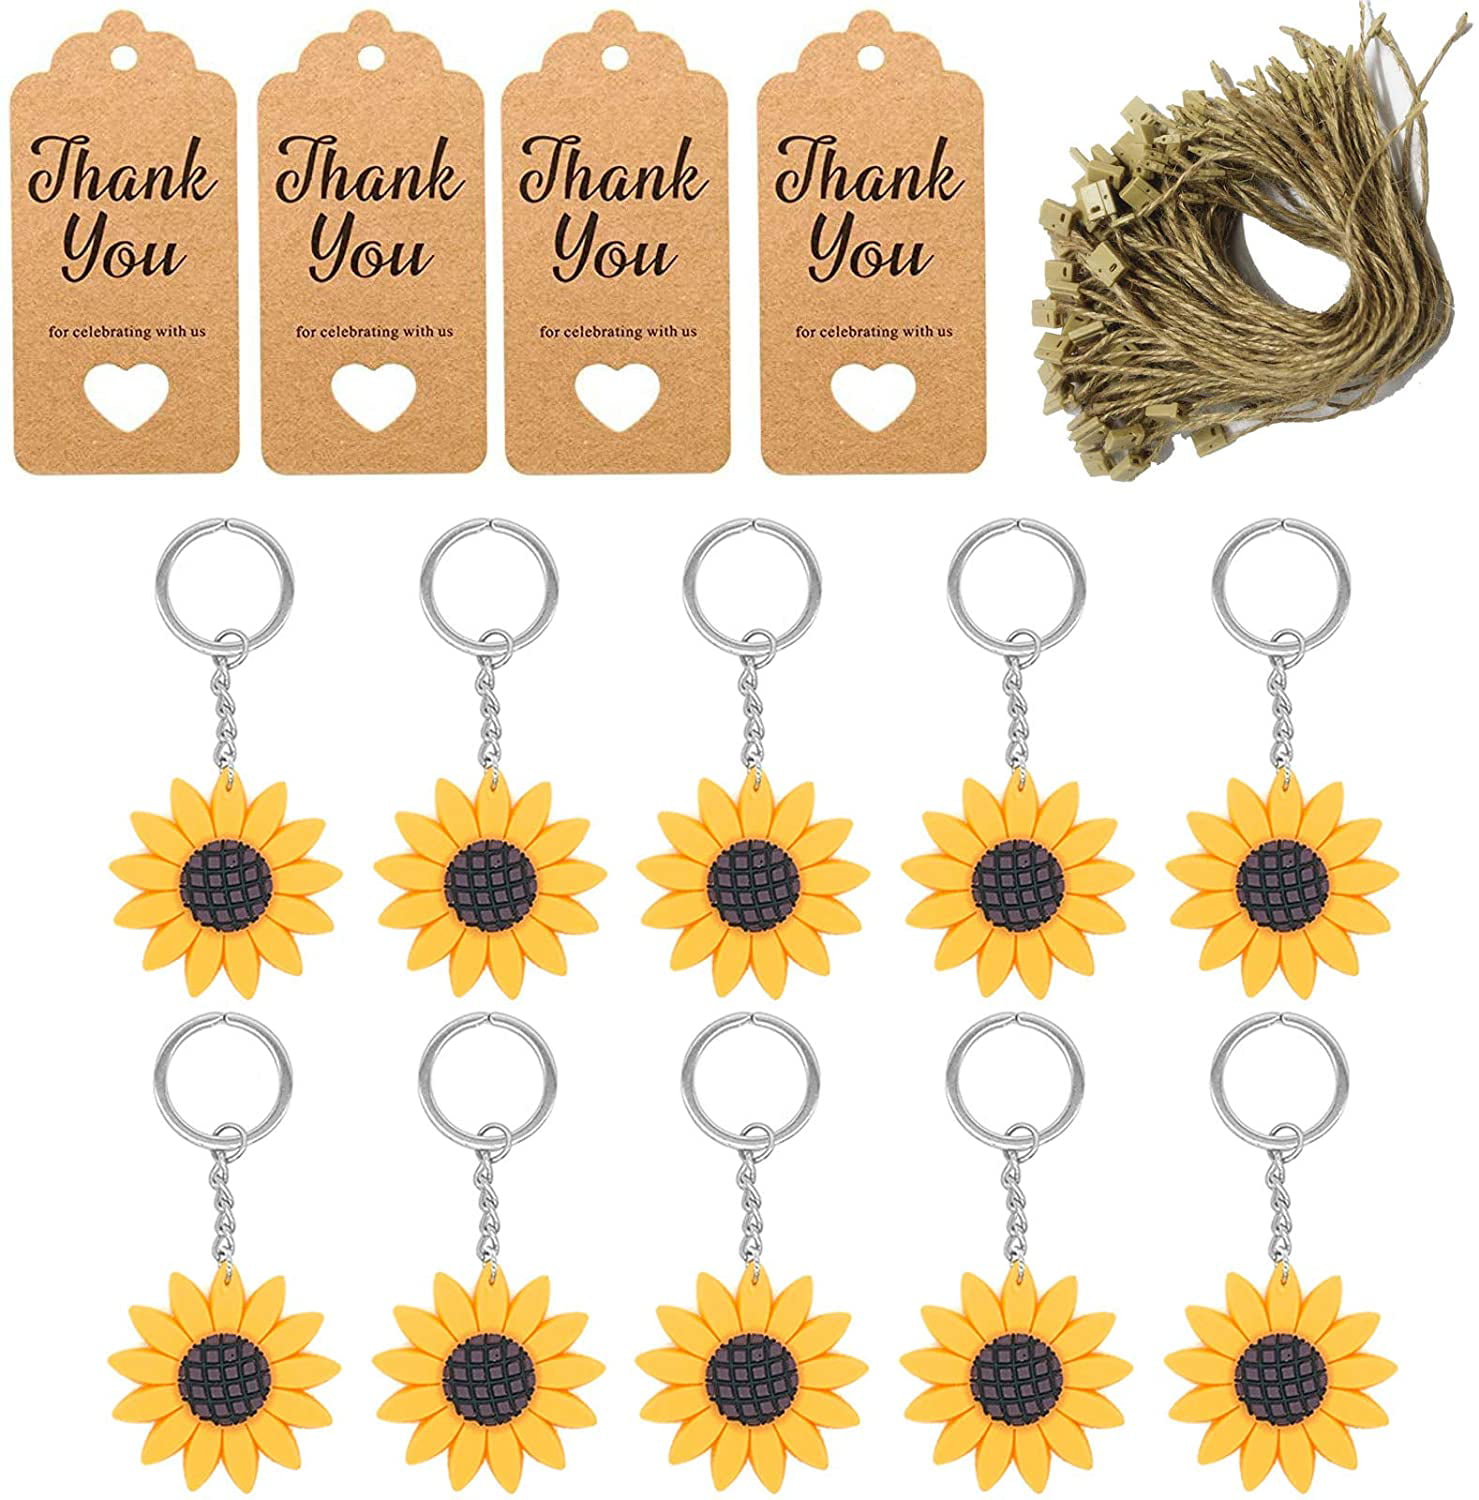 15 Pcs Baby Shower Return Favors for Guests,Sunflower Keychains+Thank You Kraft Tags for Birthday Party Supplies 